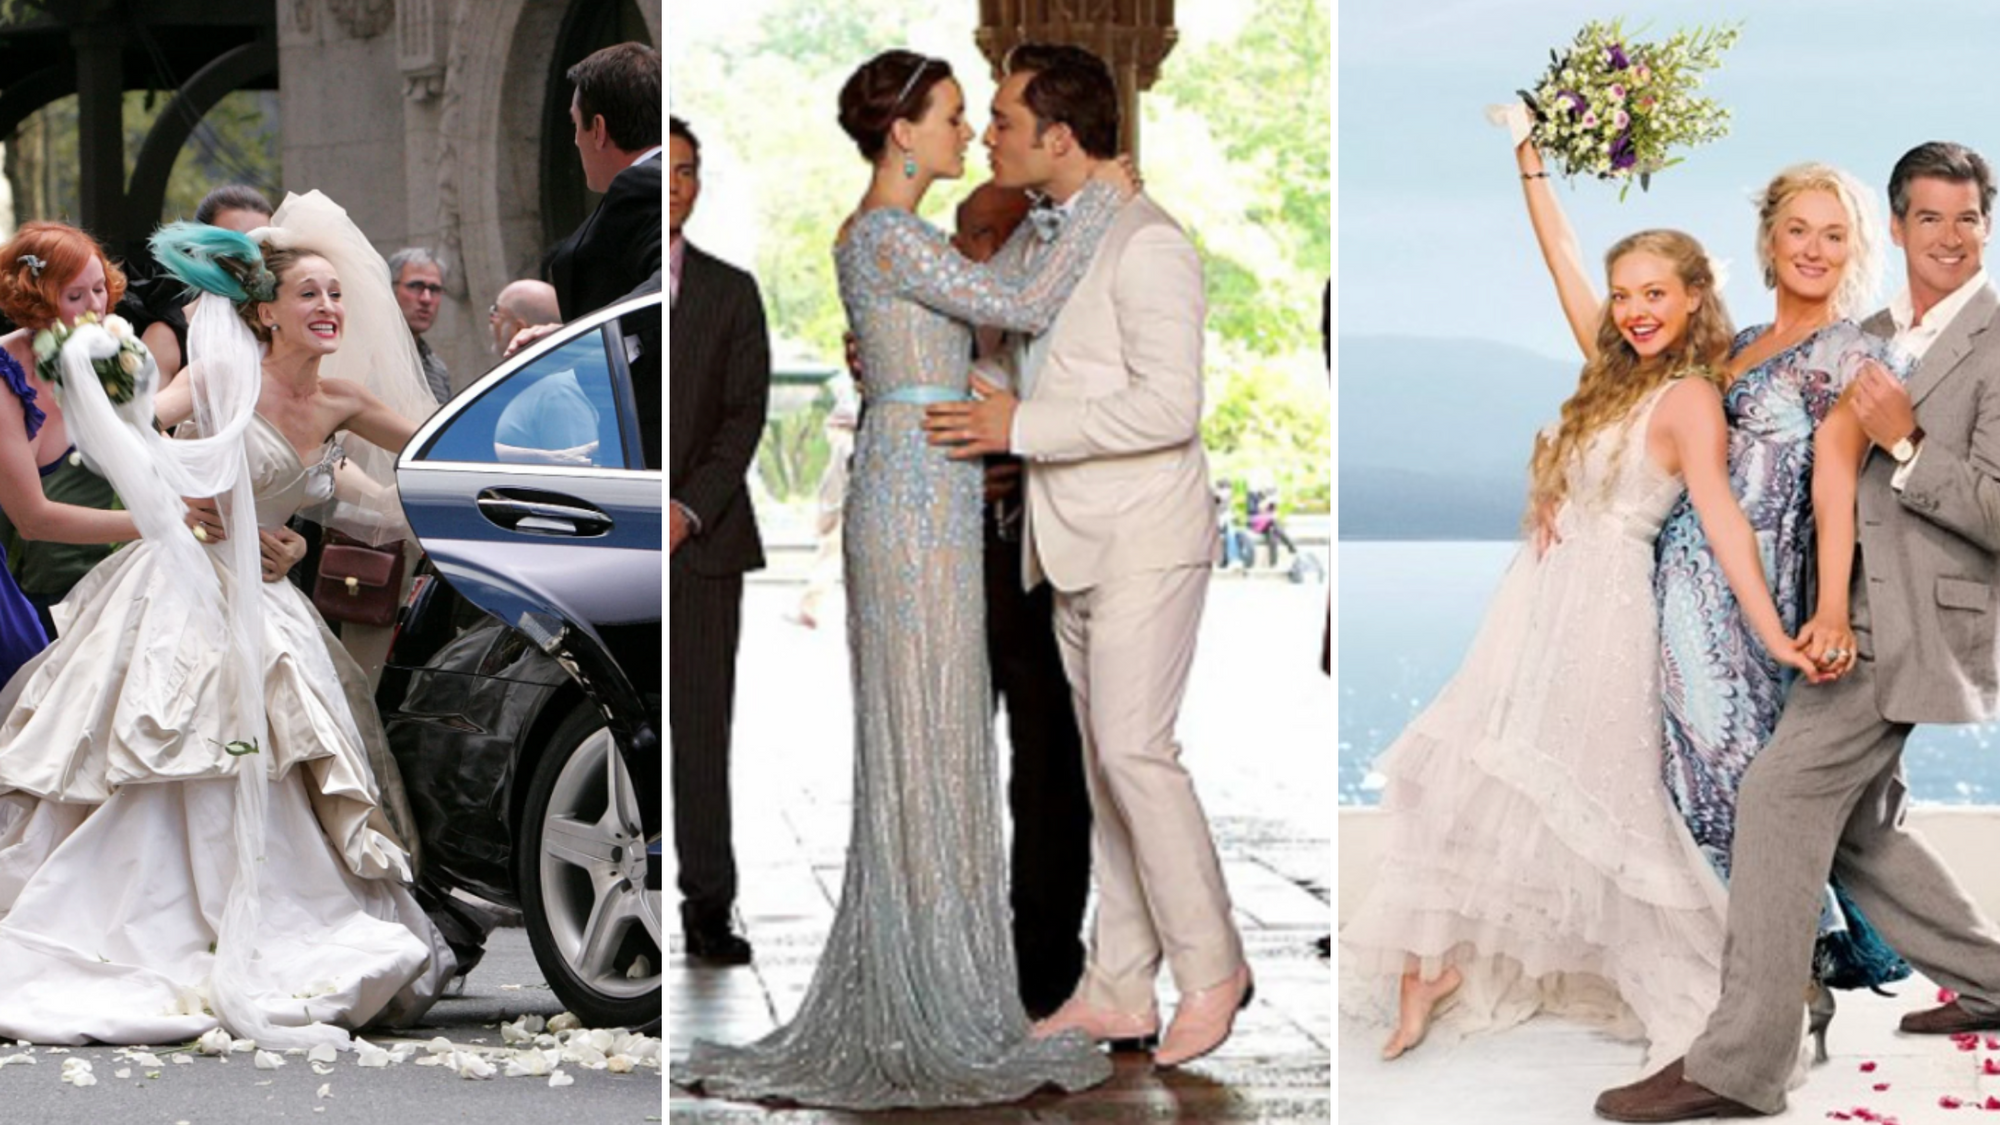 7 of the most iconic Wedding Scenes in movies